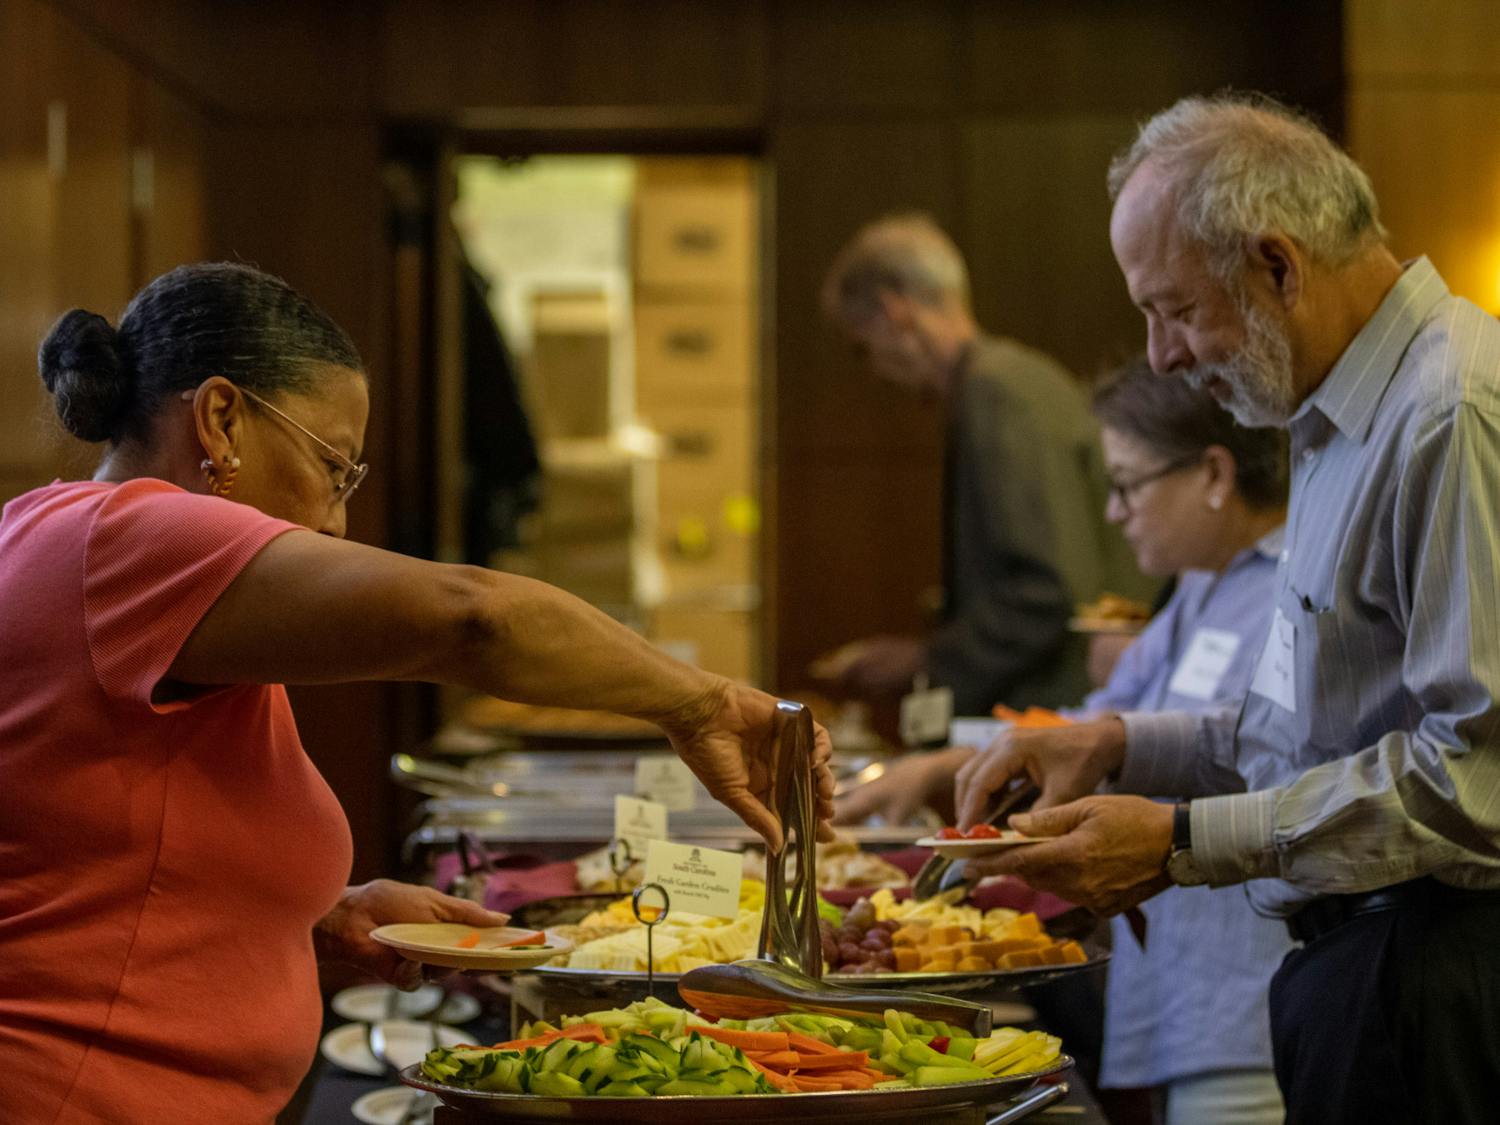 Guests help themselves to refreshments and other items before the screening of The U.S. and The Holocaust on September 14, 2022, in the Capstone Ballroom. The event was brought together by South Carolina ETV and the Anne Frank Center.